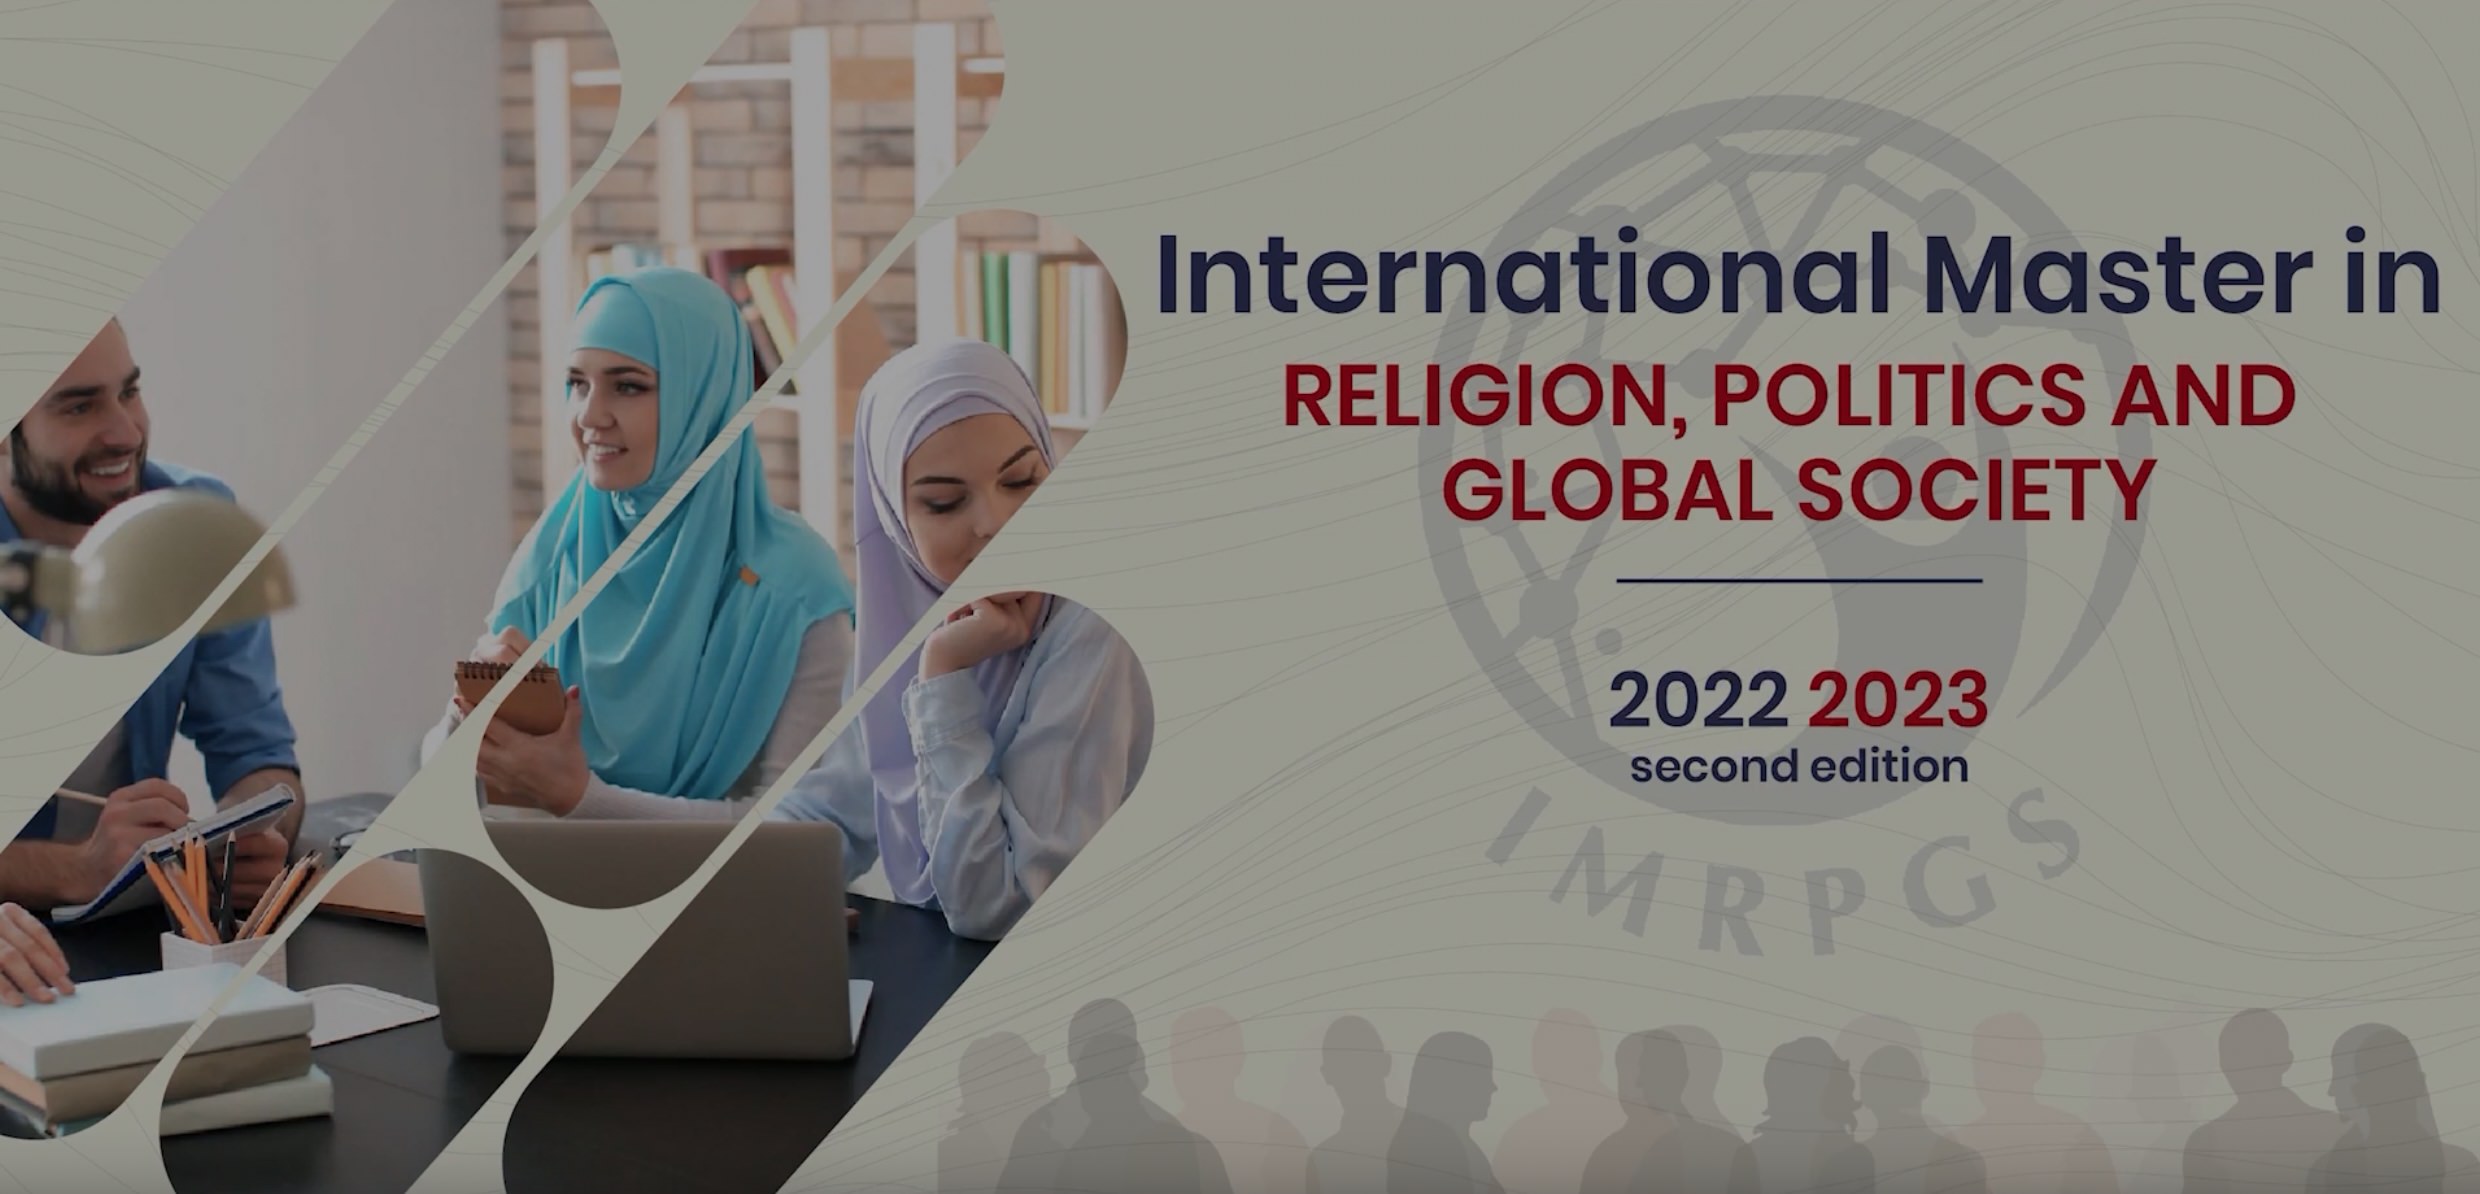 INTERNATIONAL MASTER IN RELIGION,POLITICS AND GLOBAL SOCIETY  - SECOND EDITION